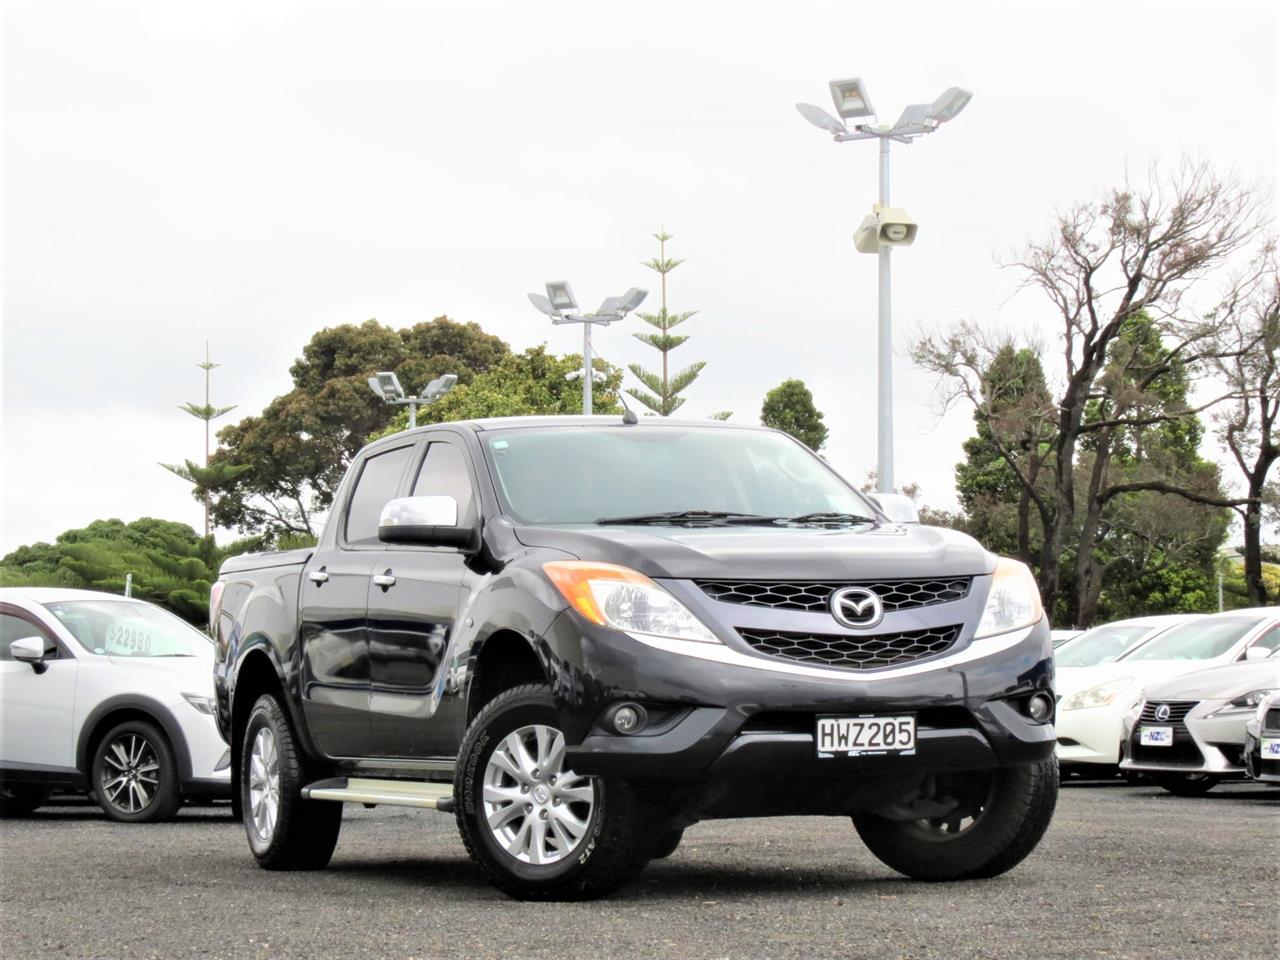 NZC 2015 Mazda BT-50 just arrived to Auckland